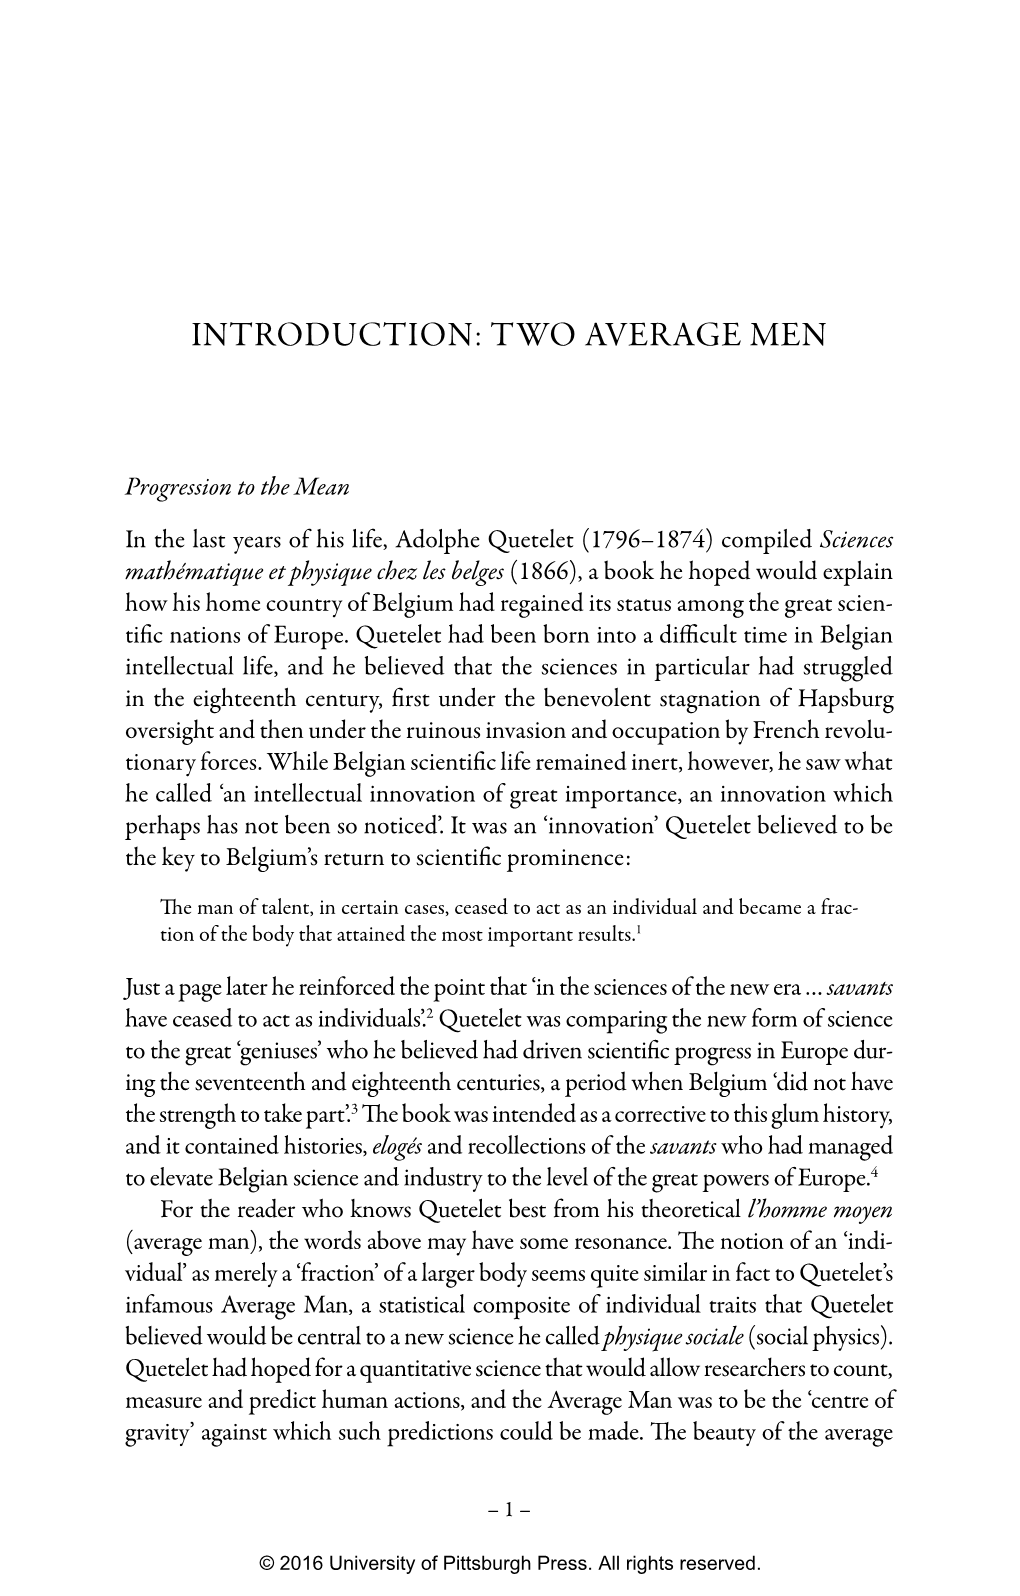 Introduction: Two Average Men